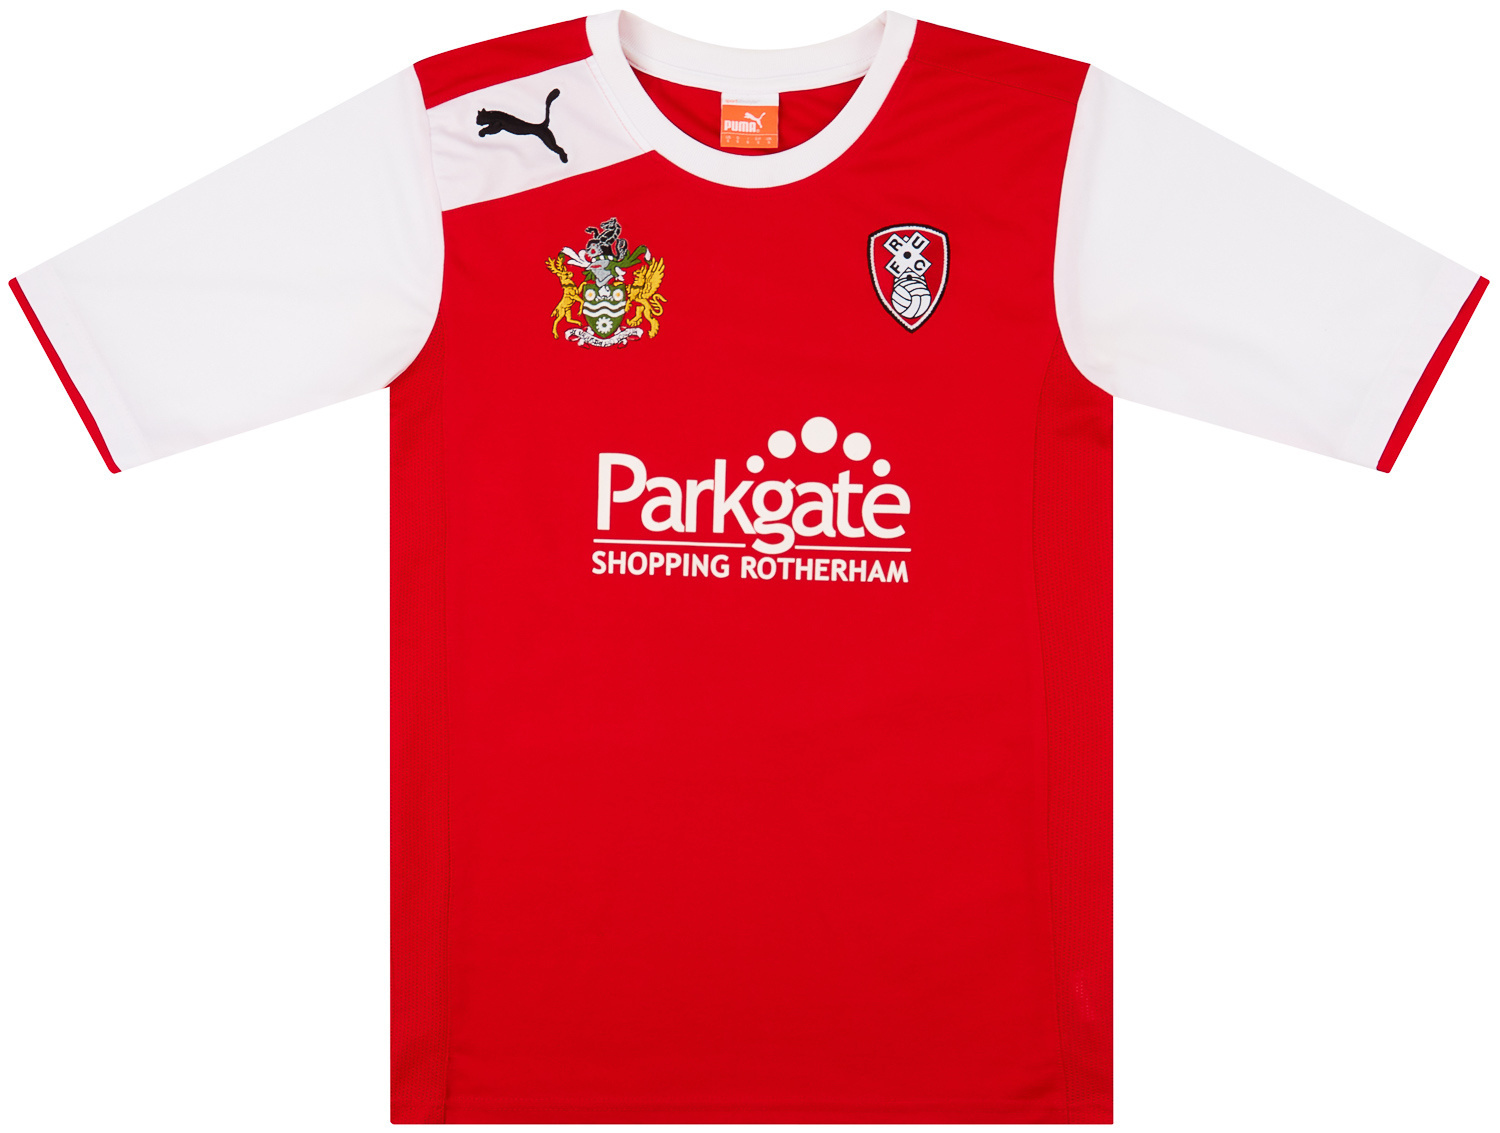 Rotherham United Home football shirt 2010 - 2011. Sponsored by Parkgate Shopping